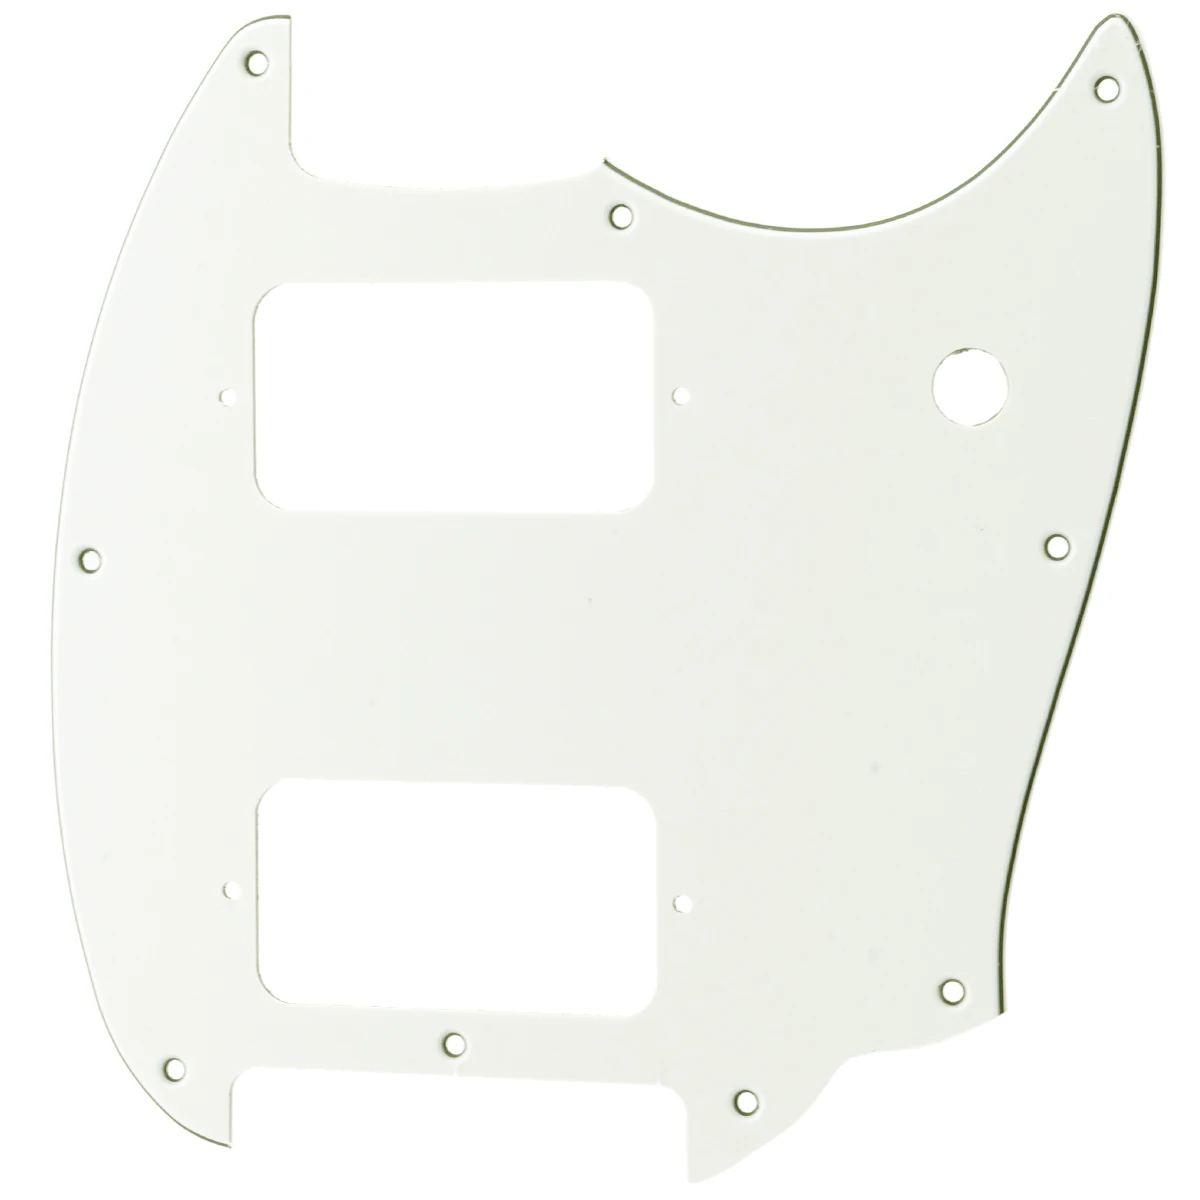 Musiclily Pro 9 Holes Round Corner HH Guitar Pickguard 2 Humbuckers for Squier Bullet Series Mustang, 3Ply White